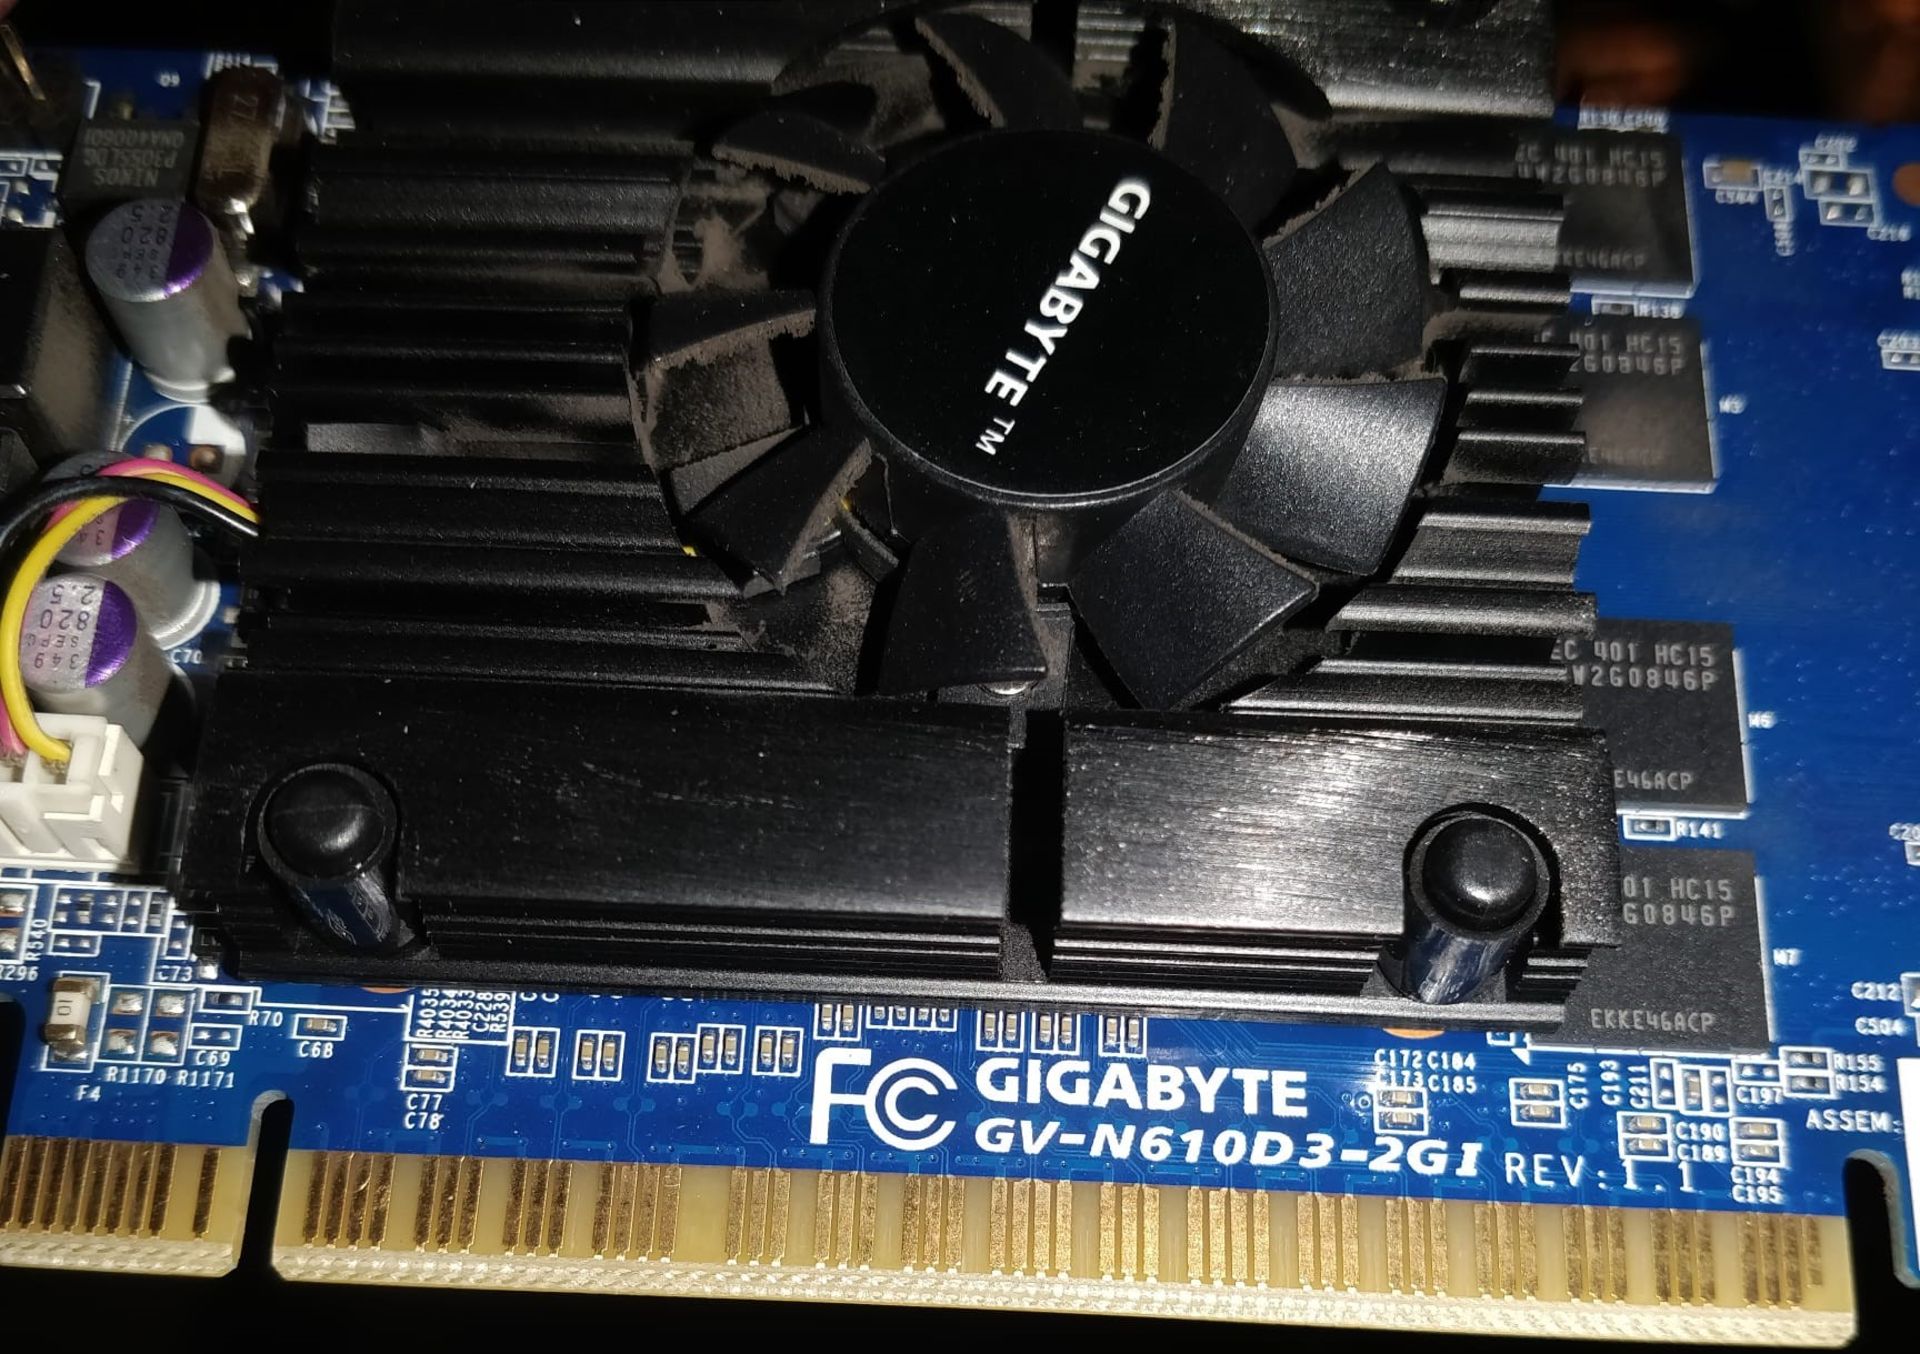 3 x Gigabyte Nvidia GeForce 610 2gb Graphics Cards With HDMI Output - Ref: MPC698 CG - CL010- - Image 2 of 2